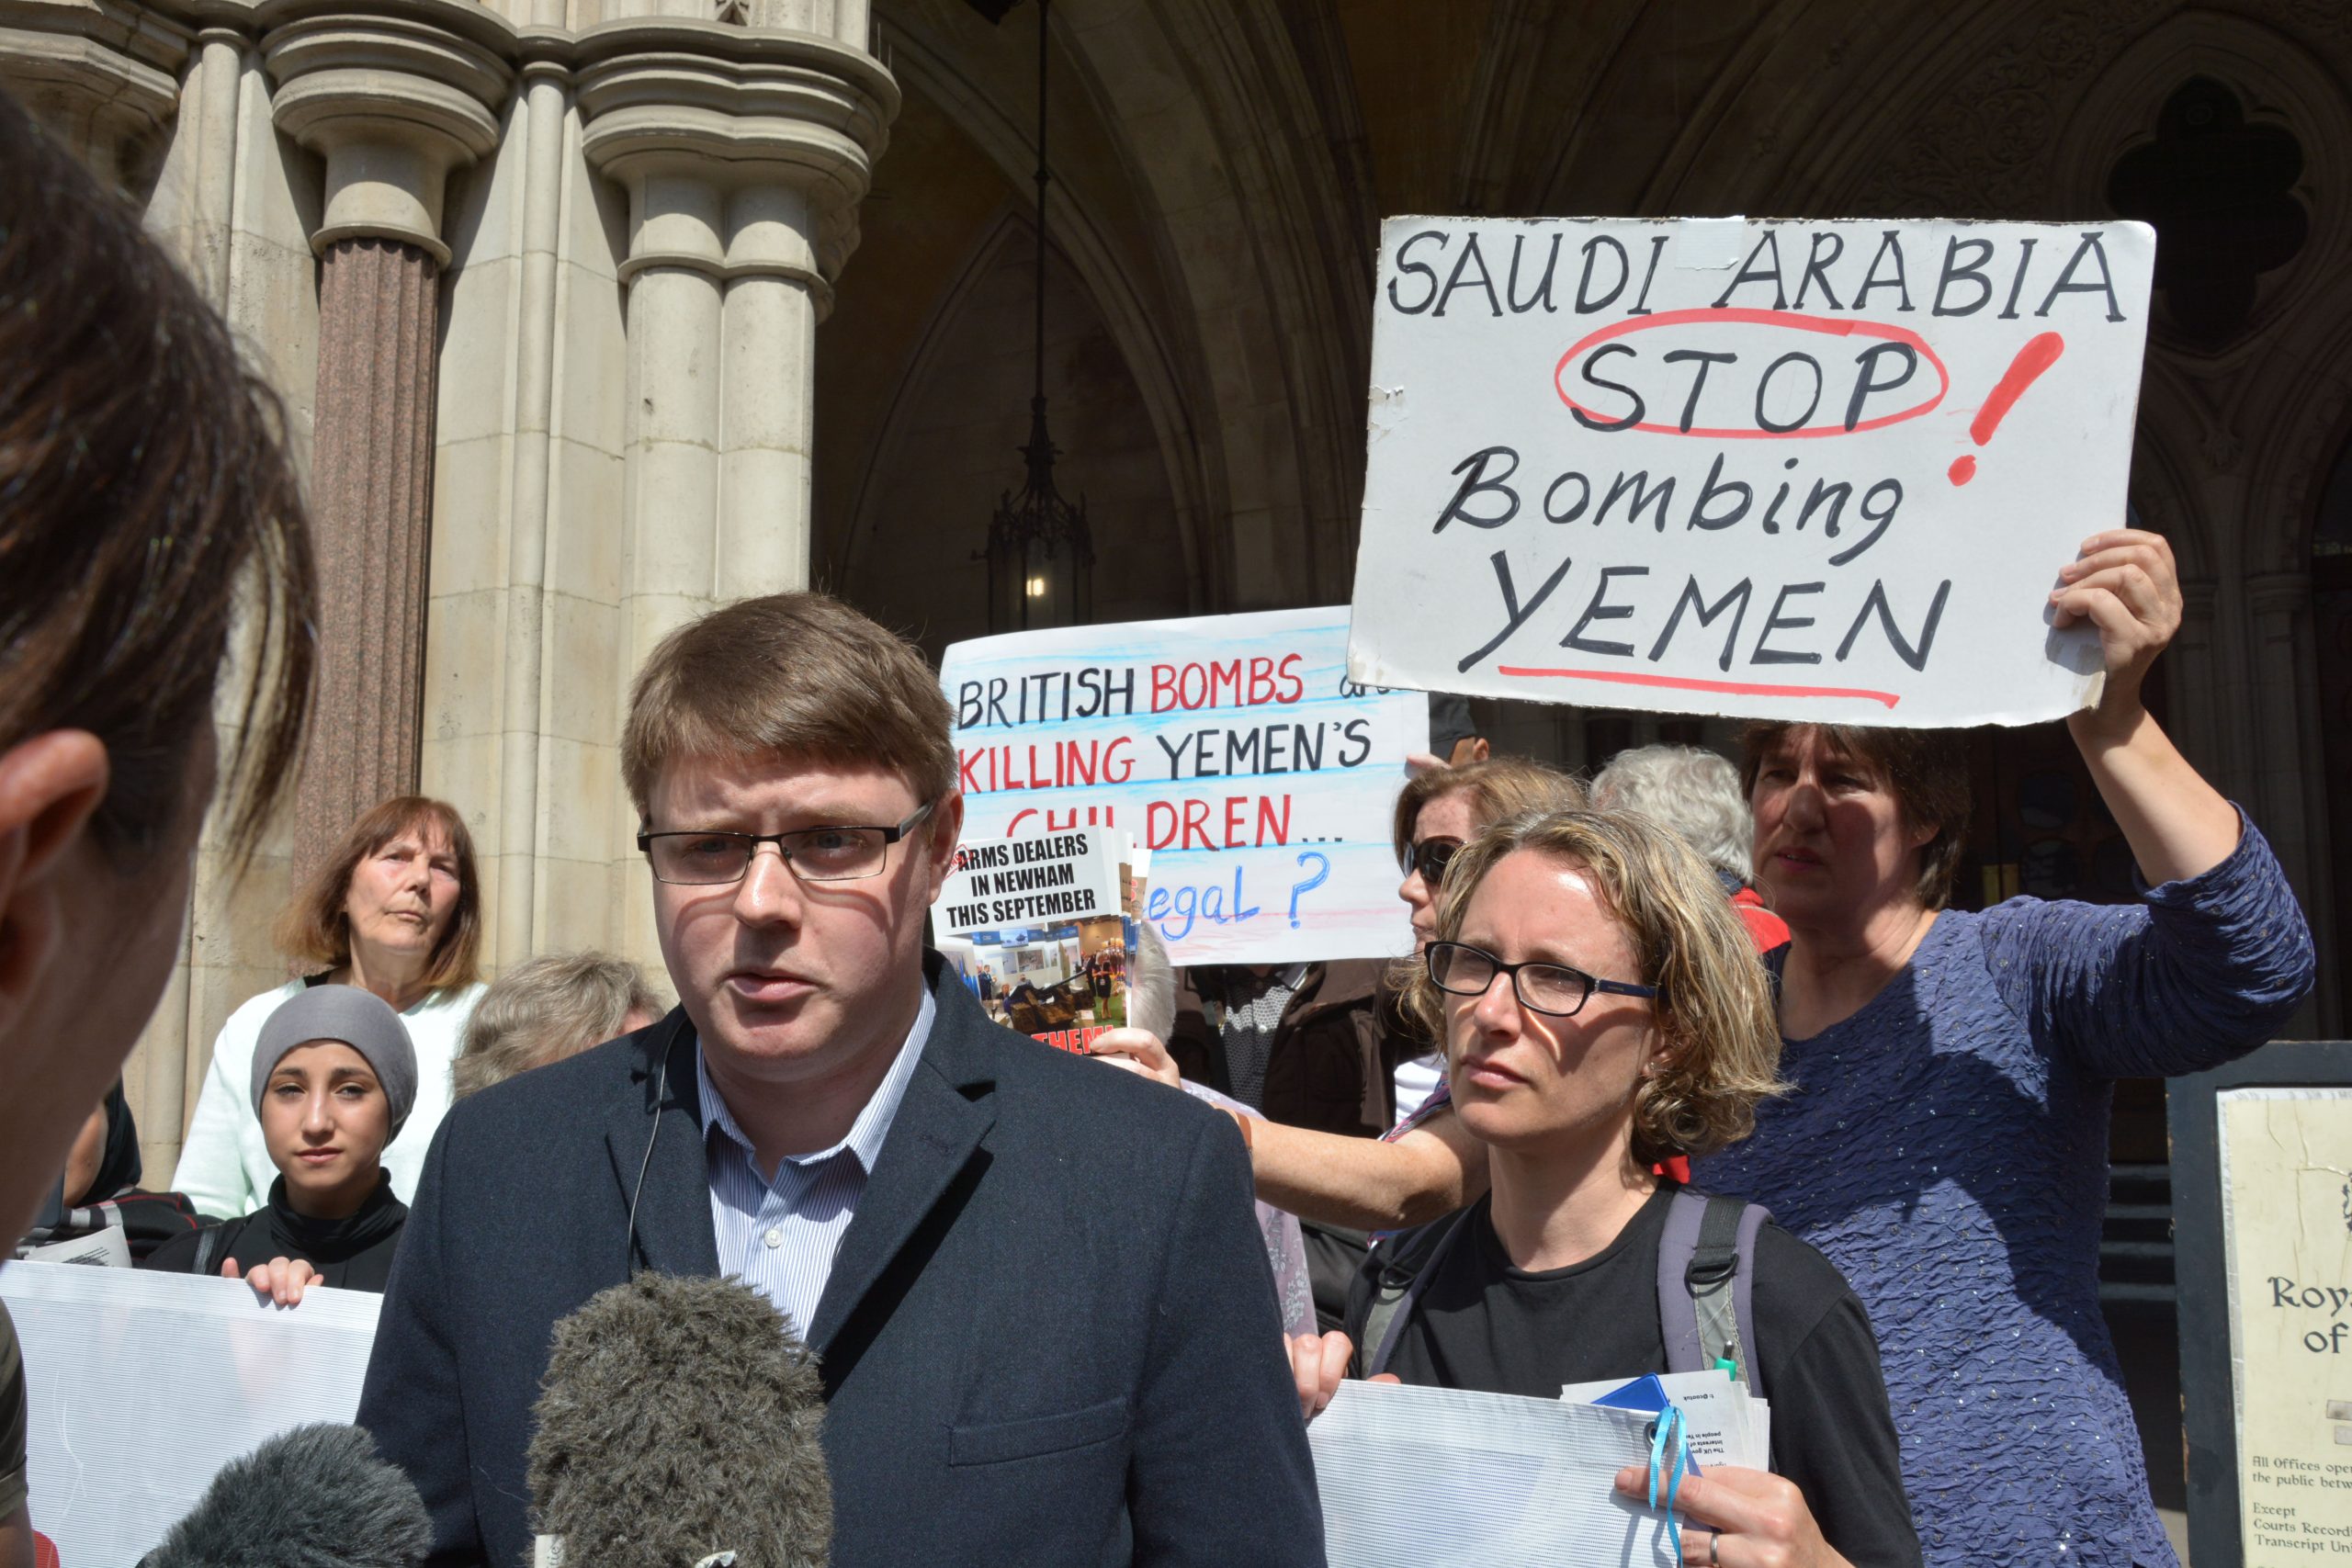 Andrew Smith from CAAT pictured outside the Royal Courts of Justice surrounded by activists holding signs saying Saudi Arabia Stop Bombing Yemen and British Bombs Killing Yemens Children. Andrew is talking to a reporter carrying a broadcast microphone